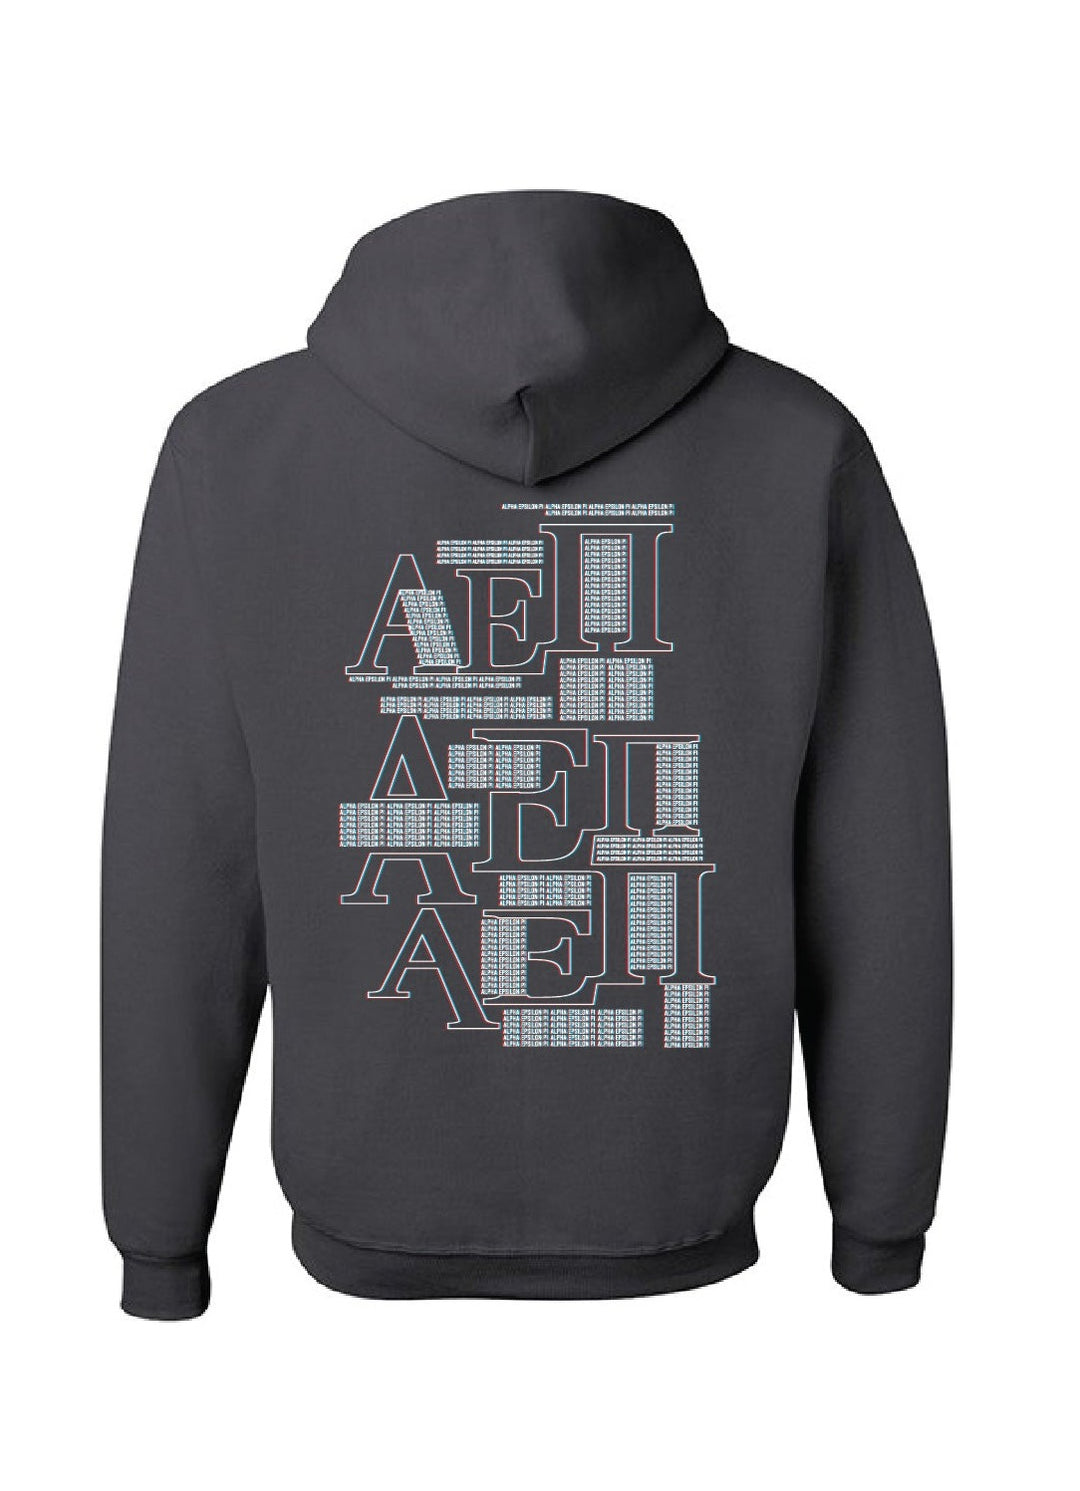 Totally Glitchin' Fraternity Hoodie